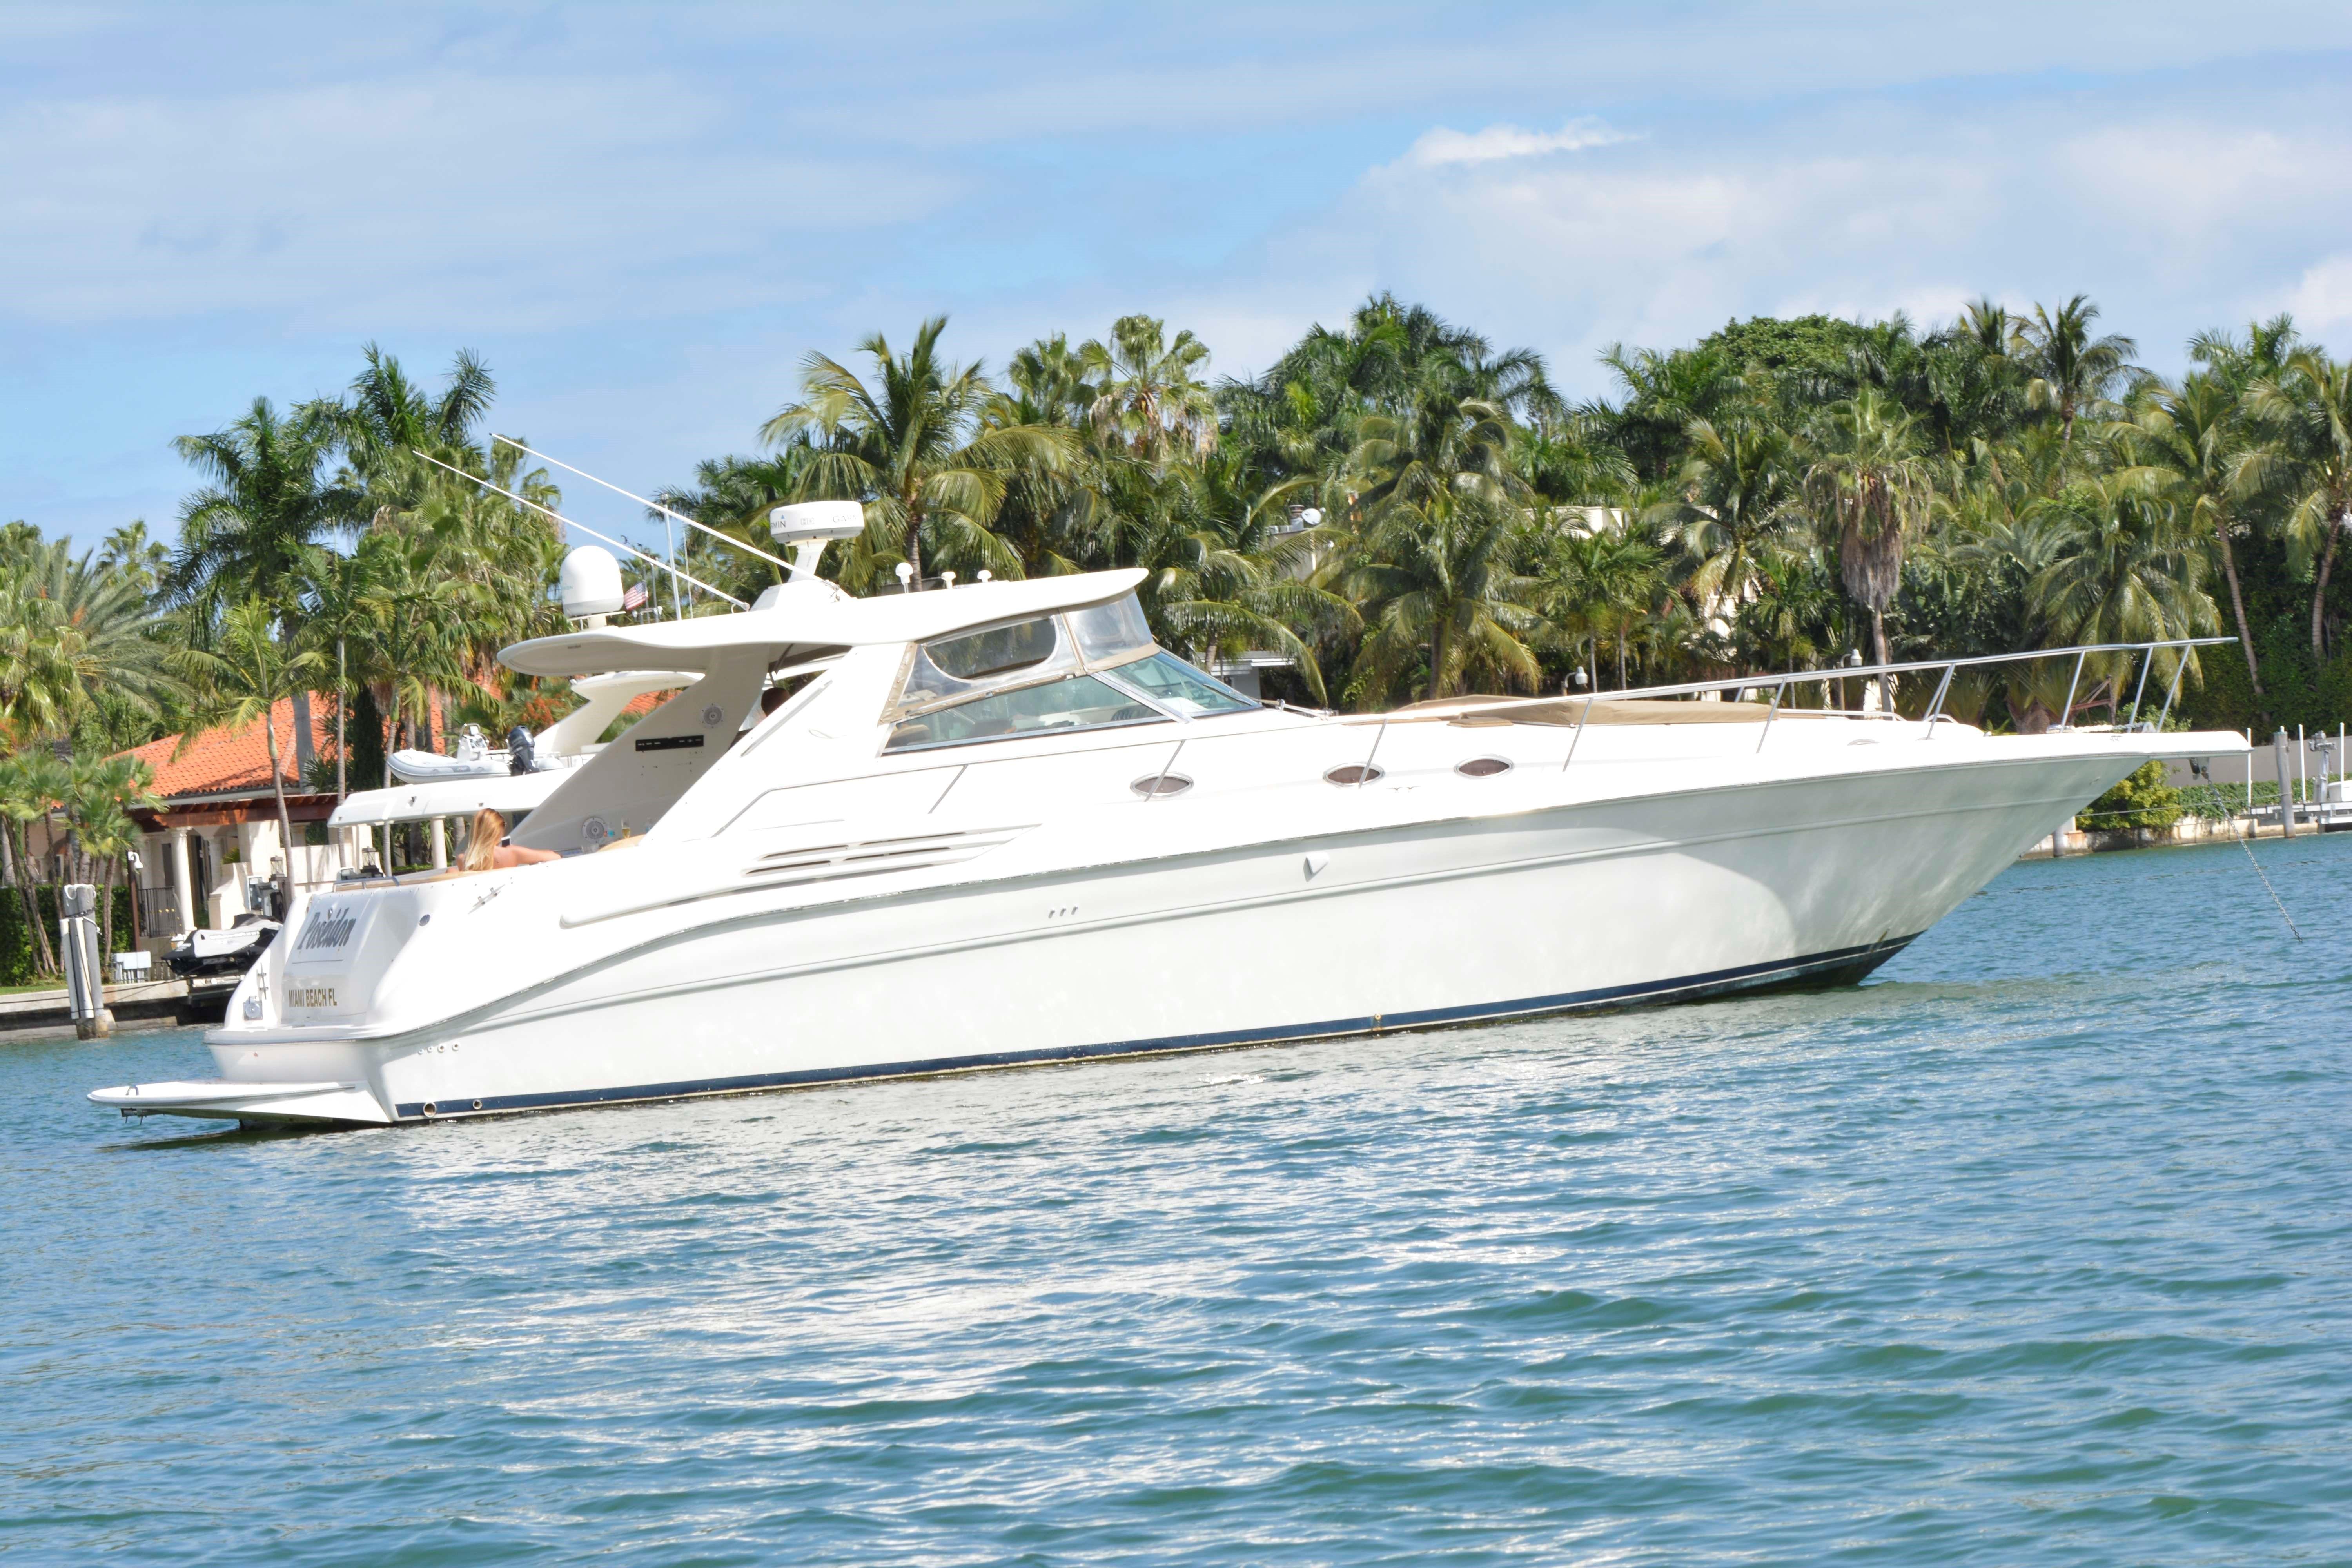 45 ft yacht for sale florida